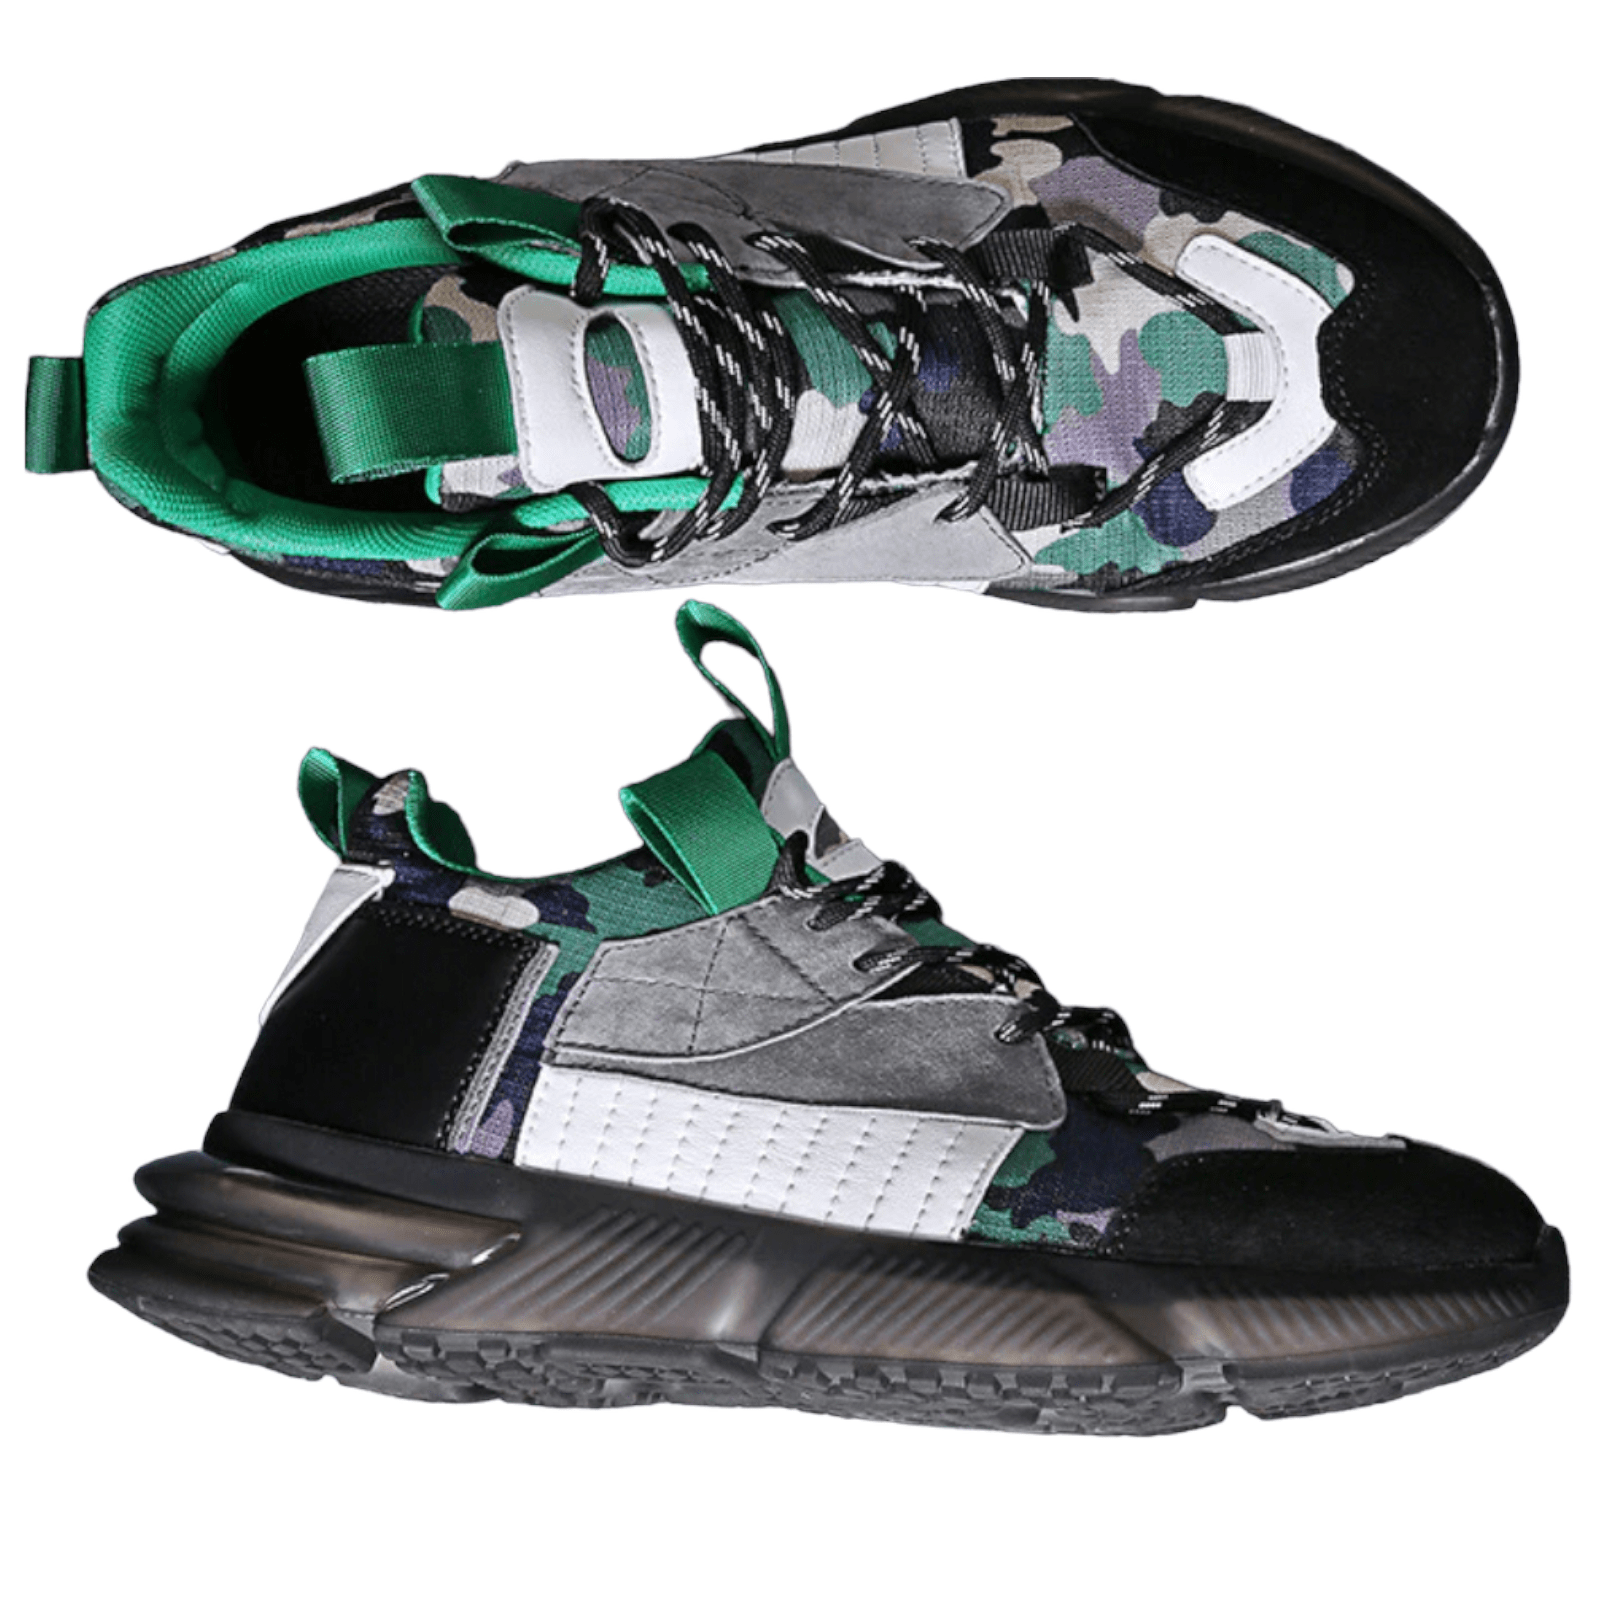 black green sneakers prowl flashlander right side and view from above kicks